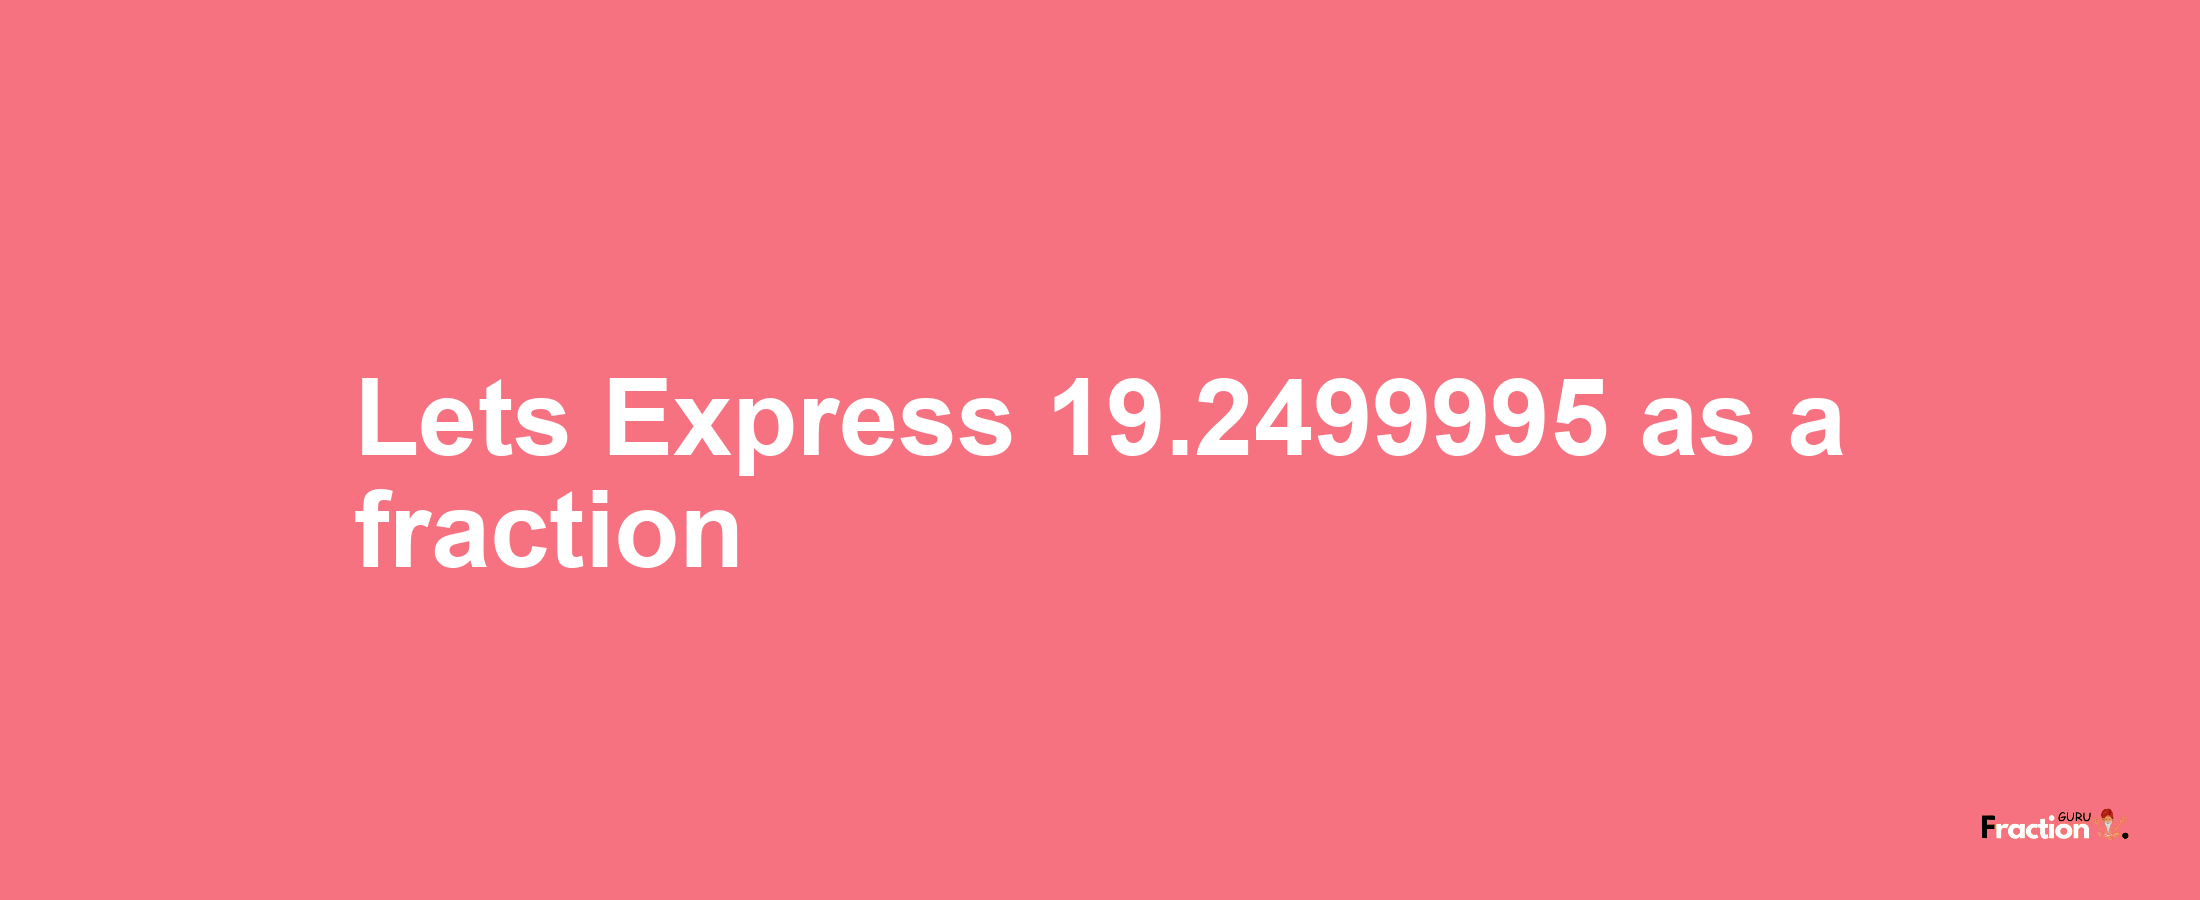 Lets Express 19.2499995 as afraction